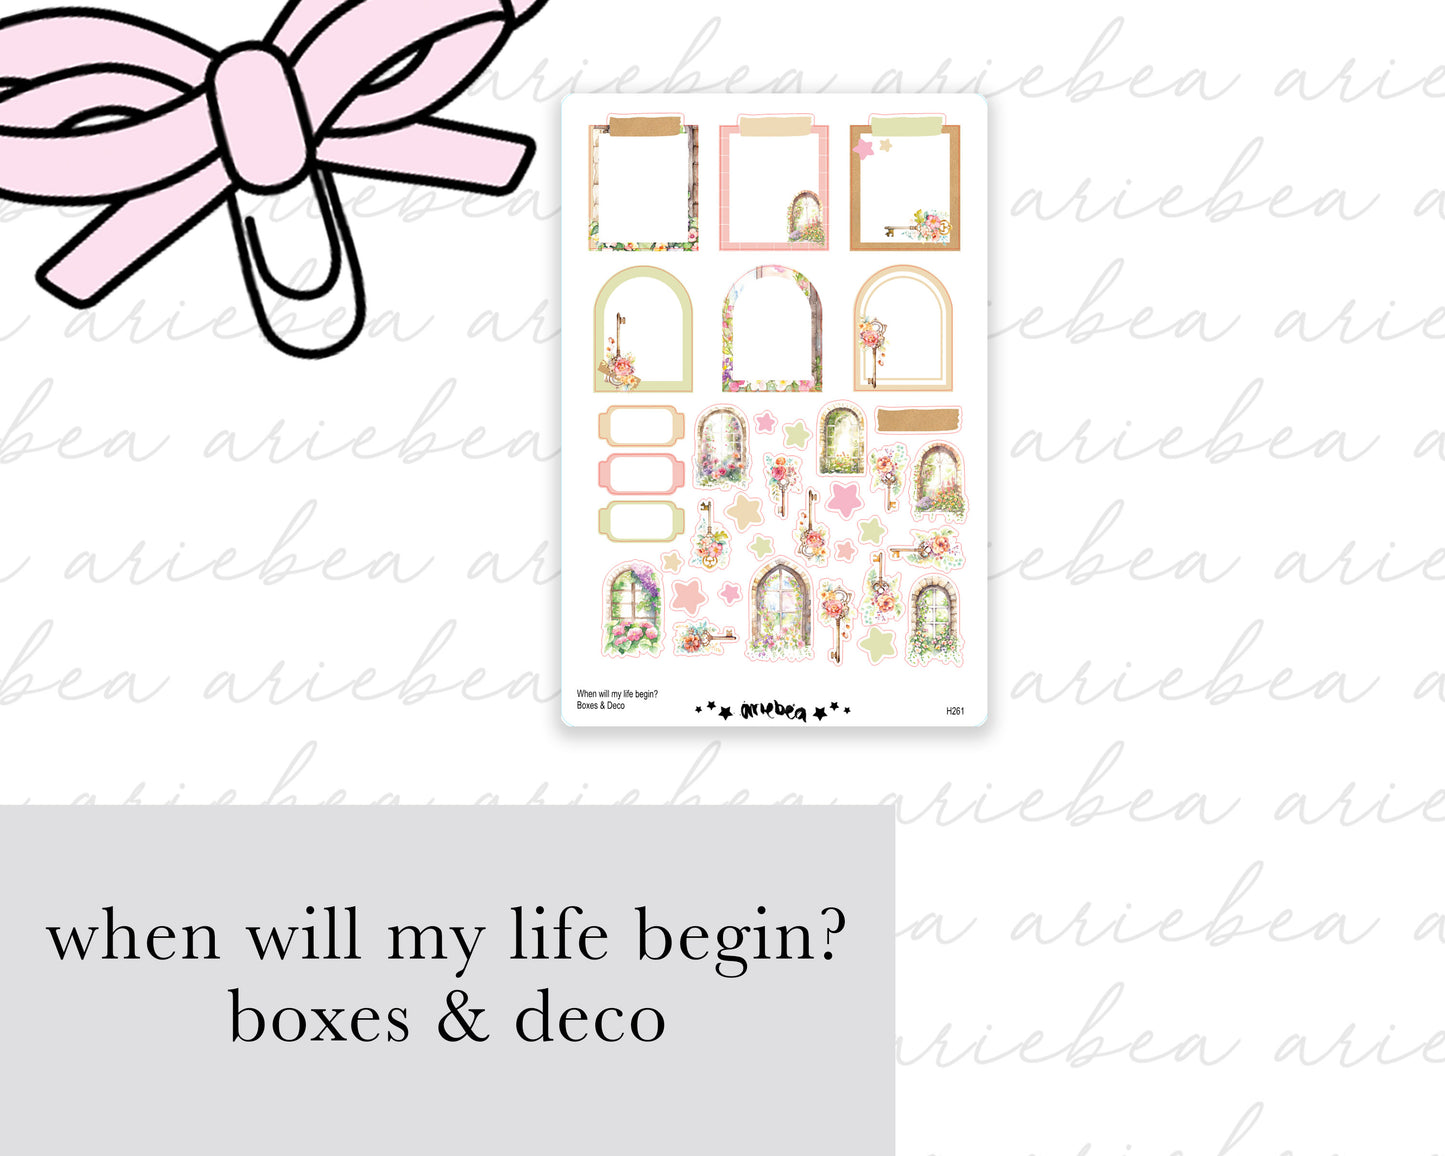 When Will My Life Begin? Boxes & Deco